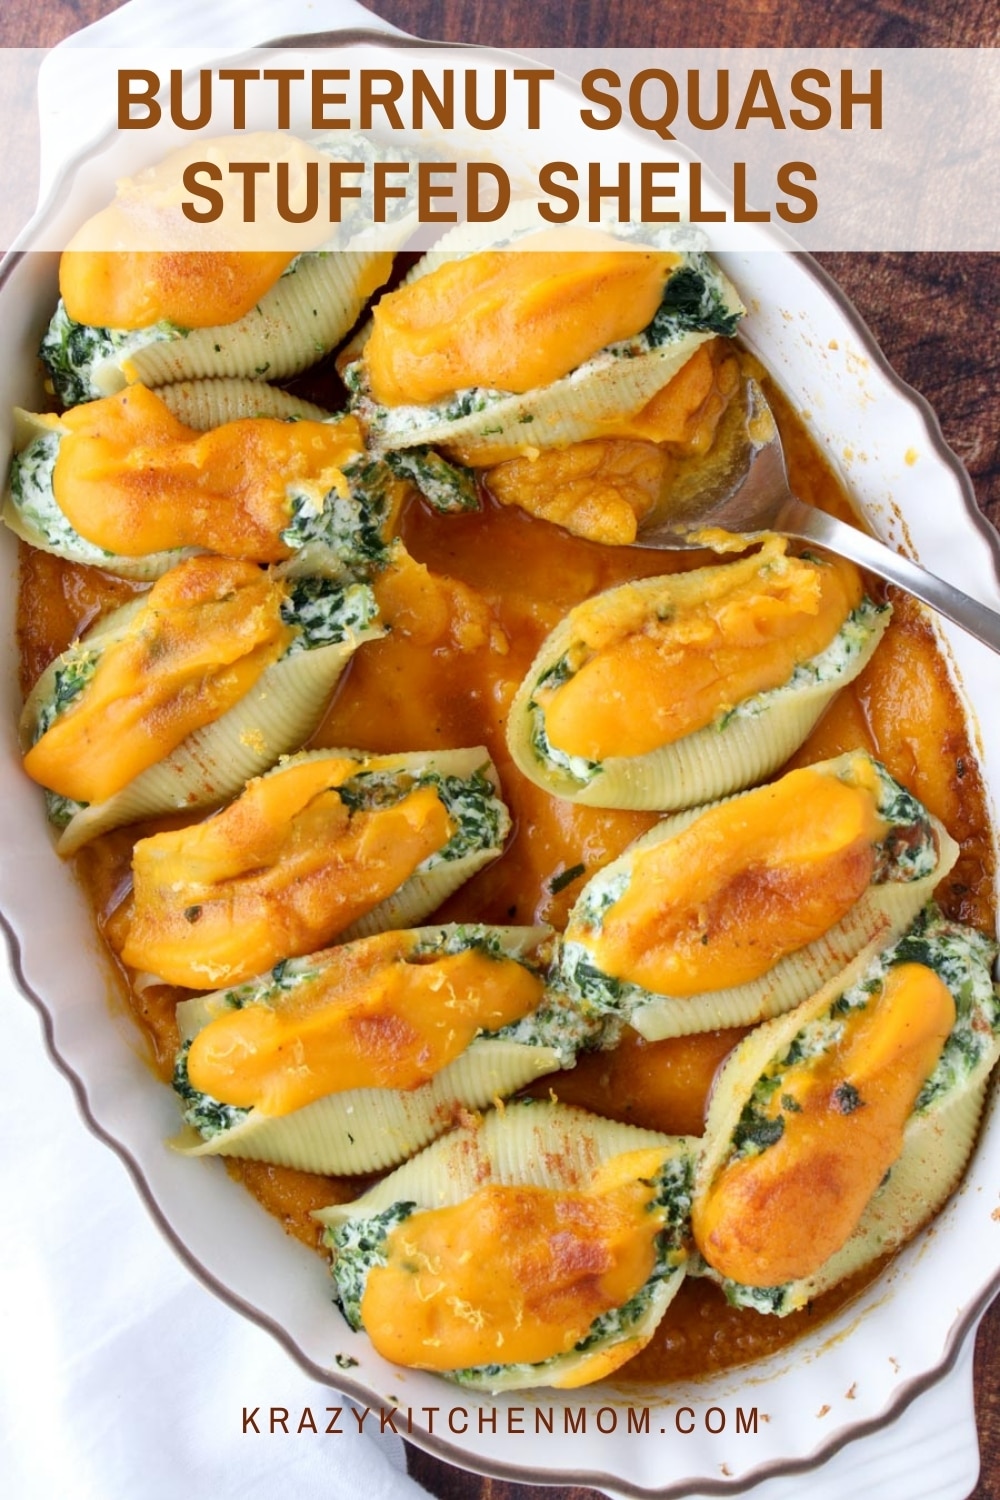 Meatless Mondays just got a whole lot better with my butternut squash stuffed shells recipe. This dish is full of creamy ricotta cheese, spinach, and butternut squash puree. It's perfect for any family dinner and impressive enough for company. via @krazykitchenmom